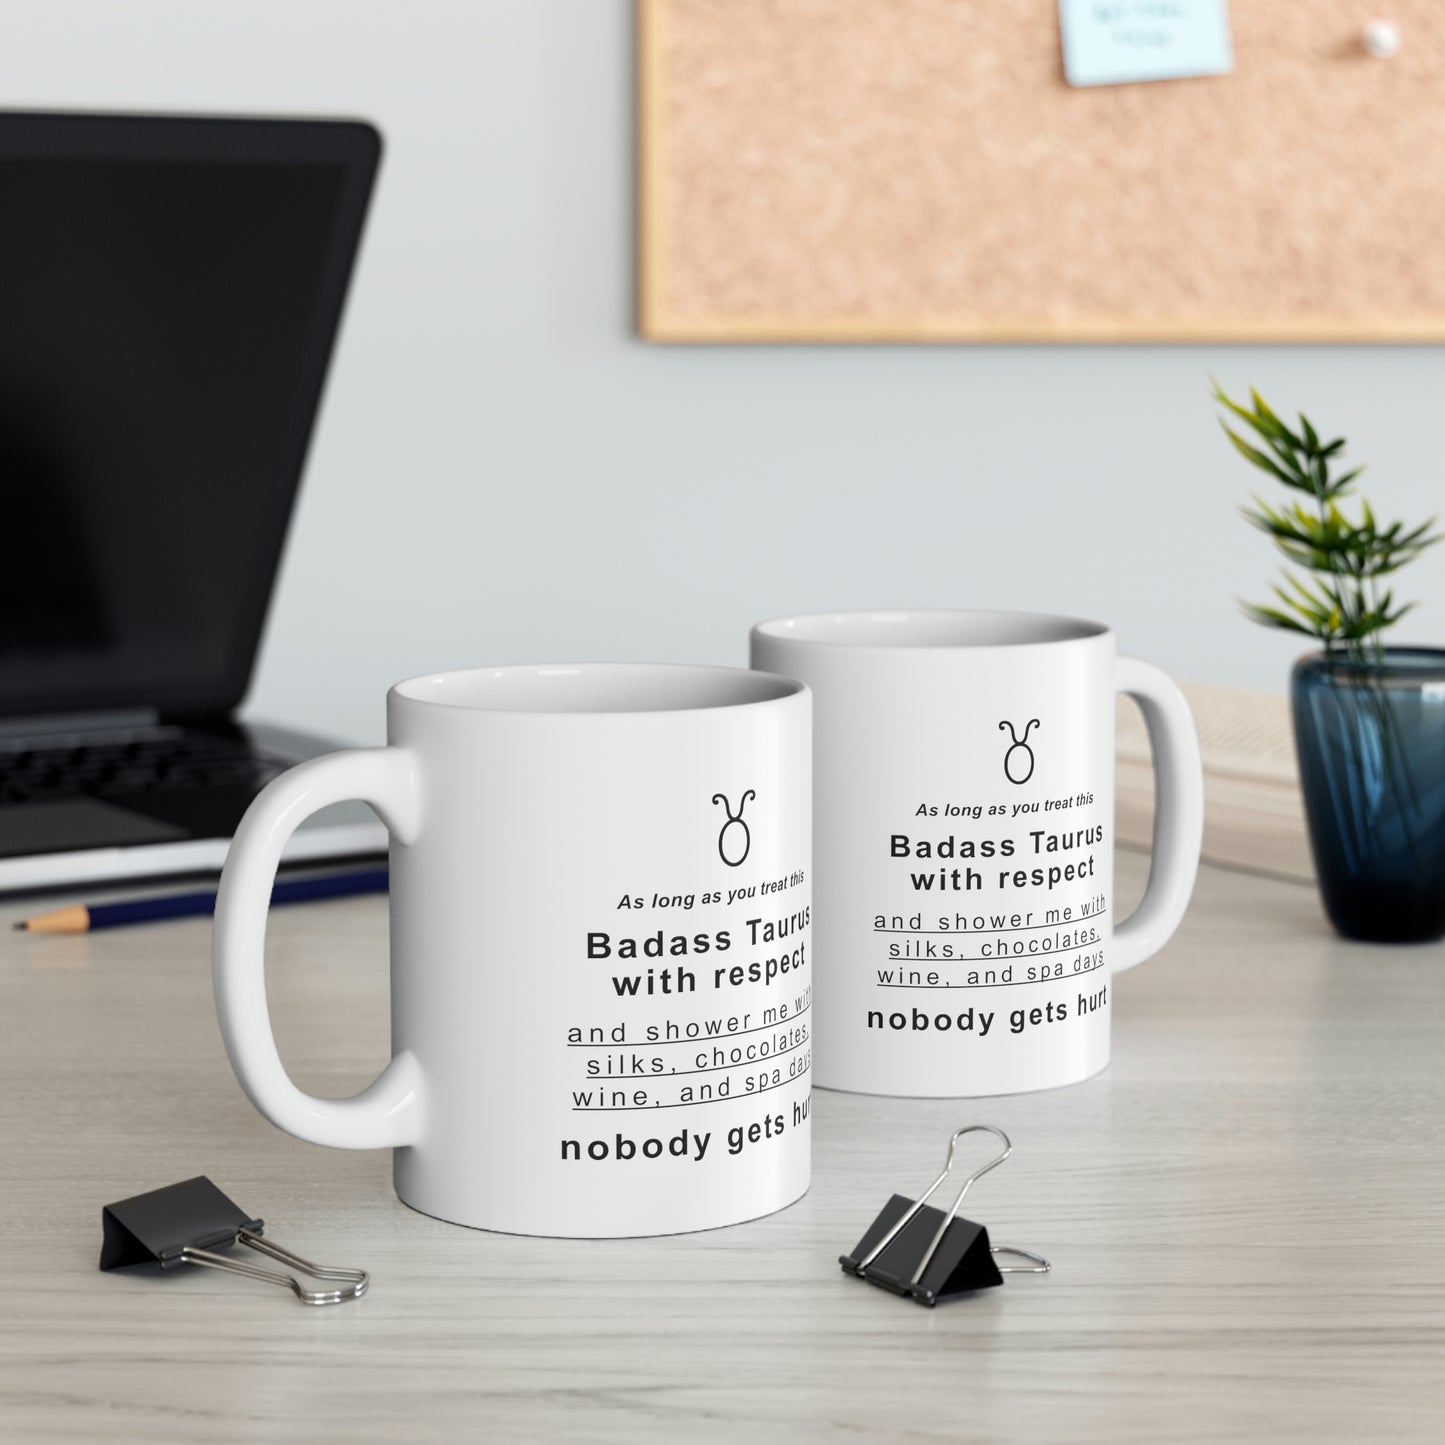 Taurus Mug: As long as you treat this badass Taurus with respect... - full text in description